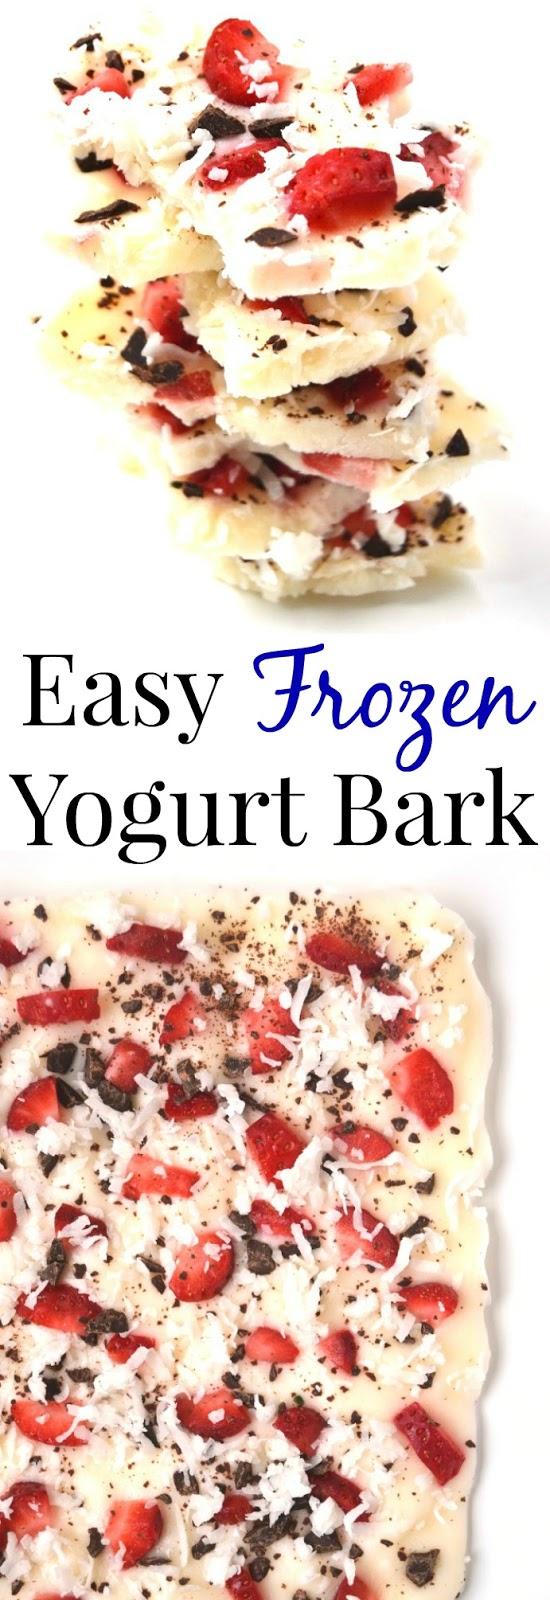 Frozen Yogurt Bark is easy, healthy and customizable- use your favorite yogurt, fruit, chocolate and other toppings! www.nutritionistreviews.com